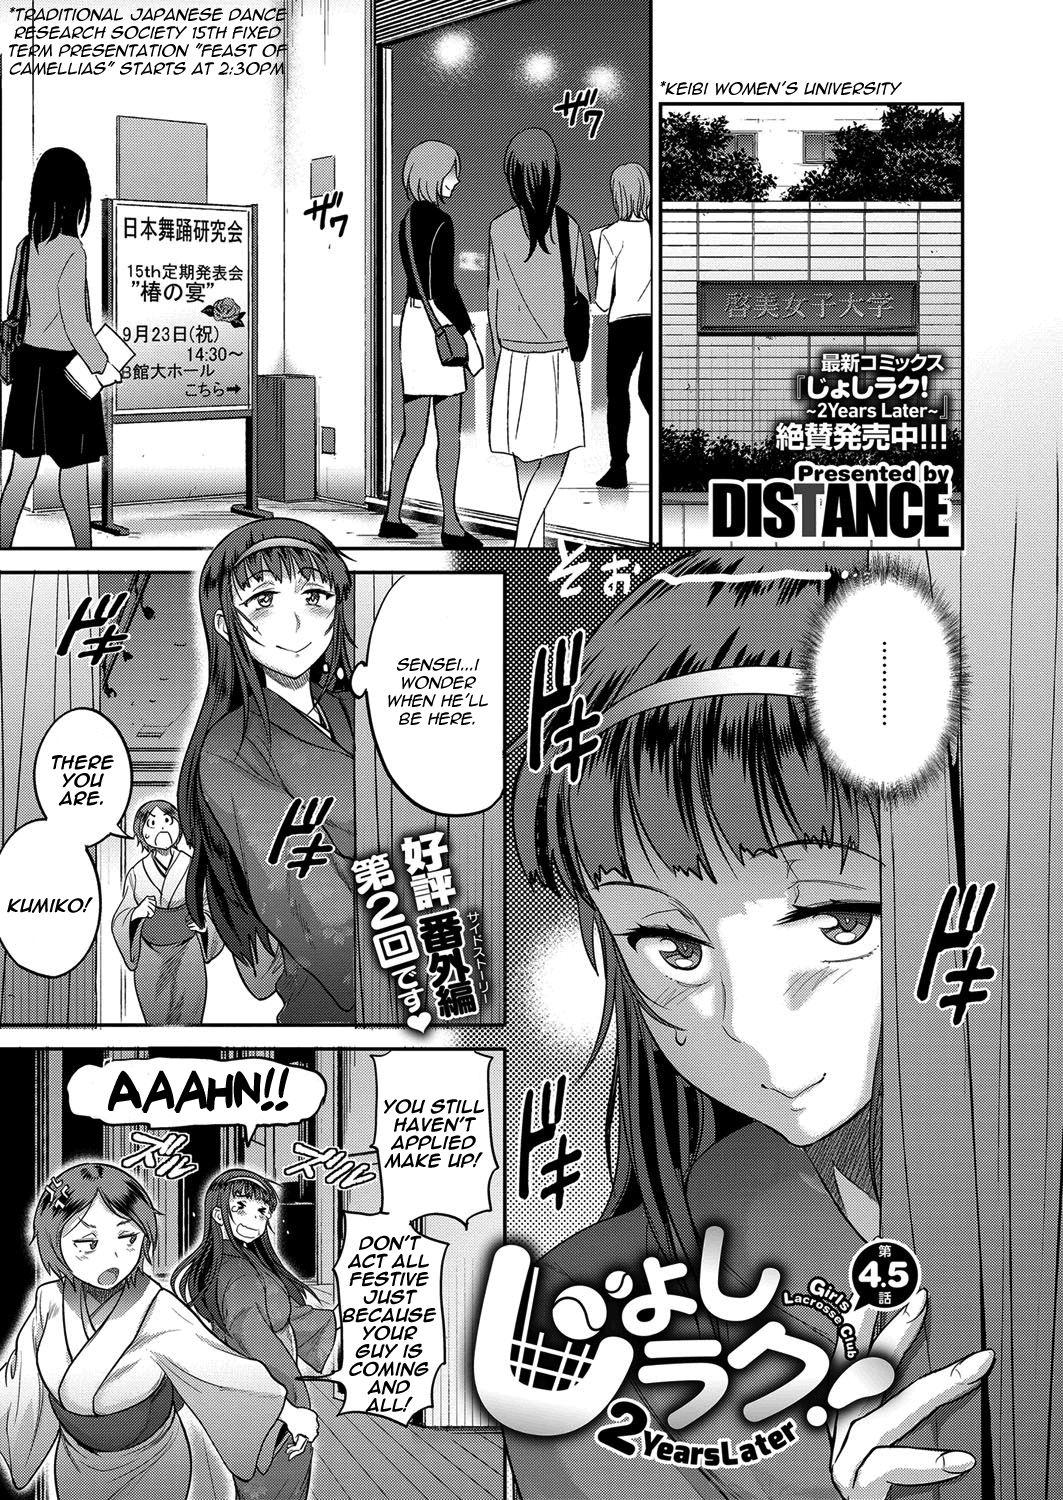 [DISTANCE] Joshi Lacu! - Girls Lacrosse Club ~2 Years Later~ Ch. 4.5 (COMIC ExE 07) [English] [TripleSevenScans] [Digital] 0